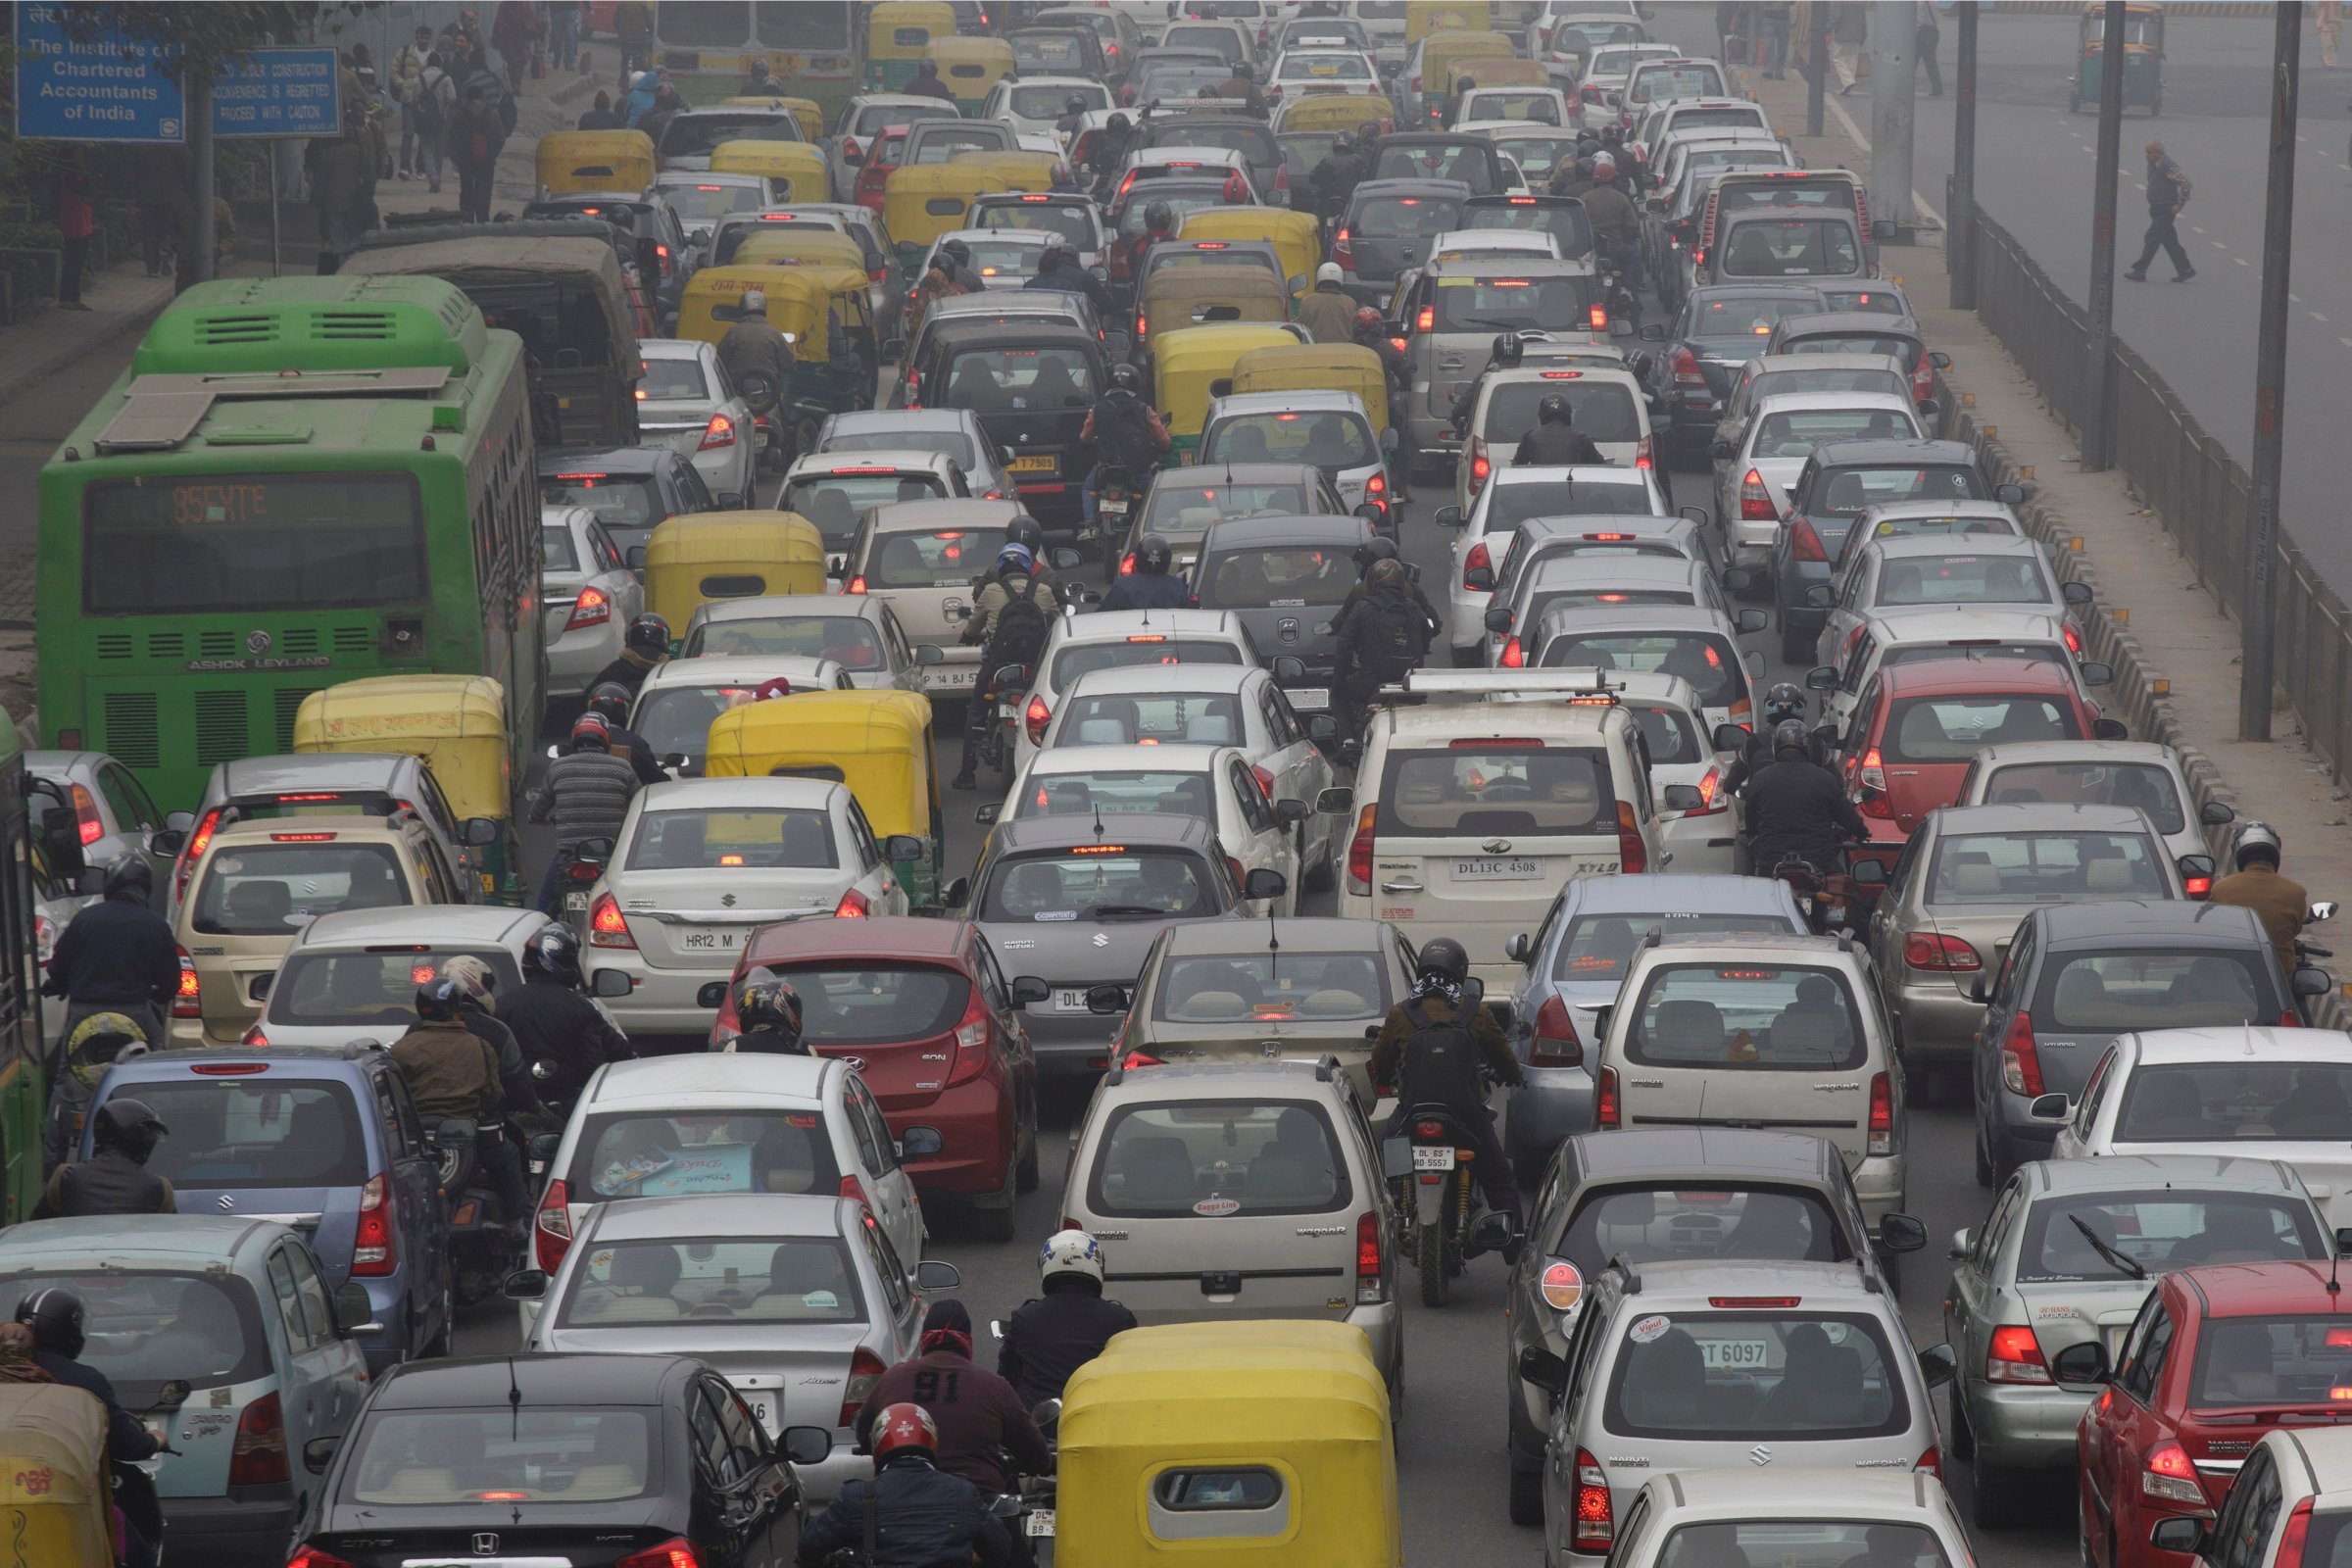 Traffic make way in haze mainly caused by air pollution in Delhi, India on January 20, 2014. Air pollution in India exceeds that of China as diesel fuel subsidies encourage ownership of polluting vehicles. (Kuni Takahashi/Bloomberg)